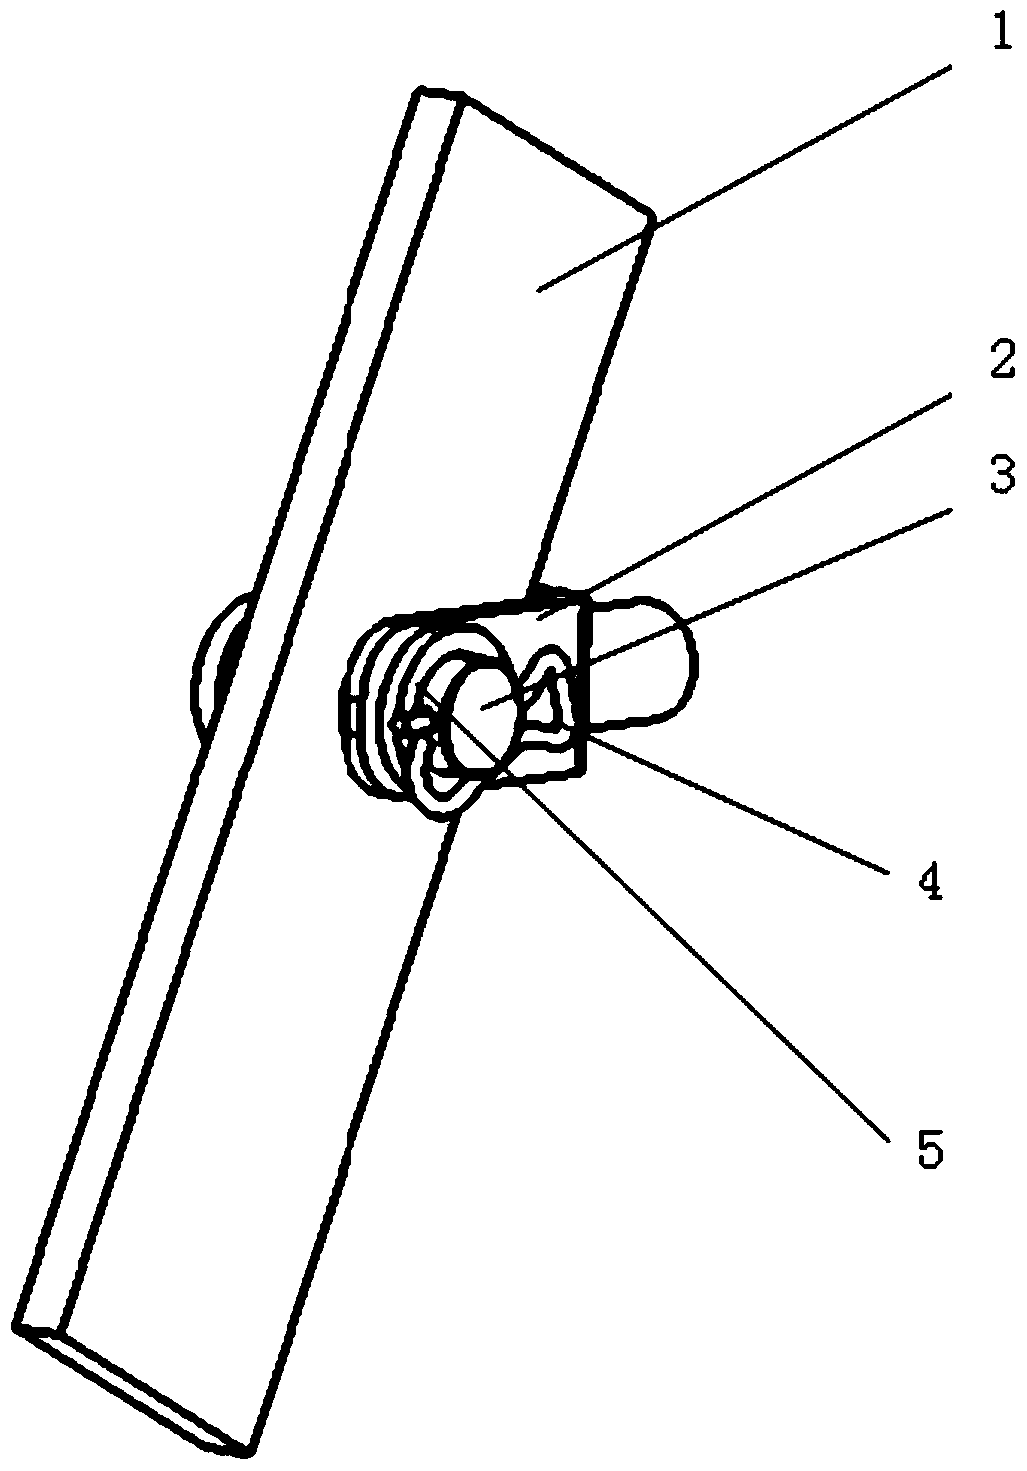 Locking mechanism and locking structure of brake pedal arm and vacuum booster push rod